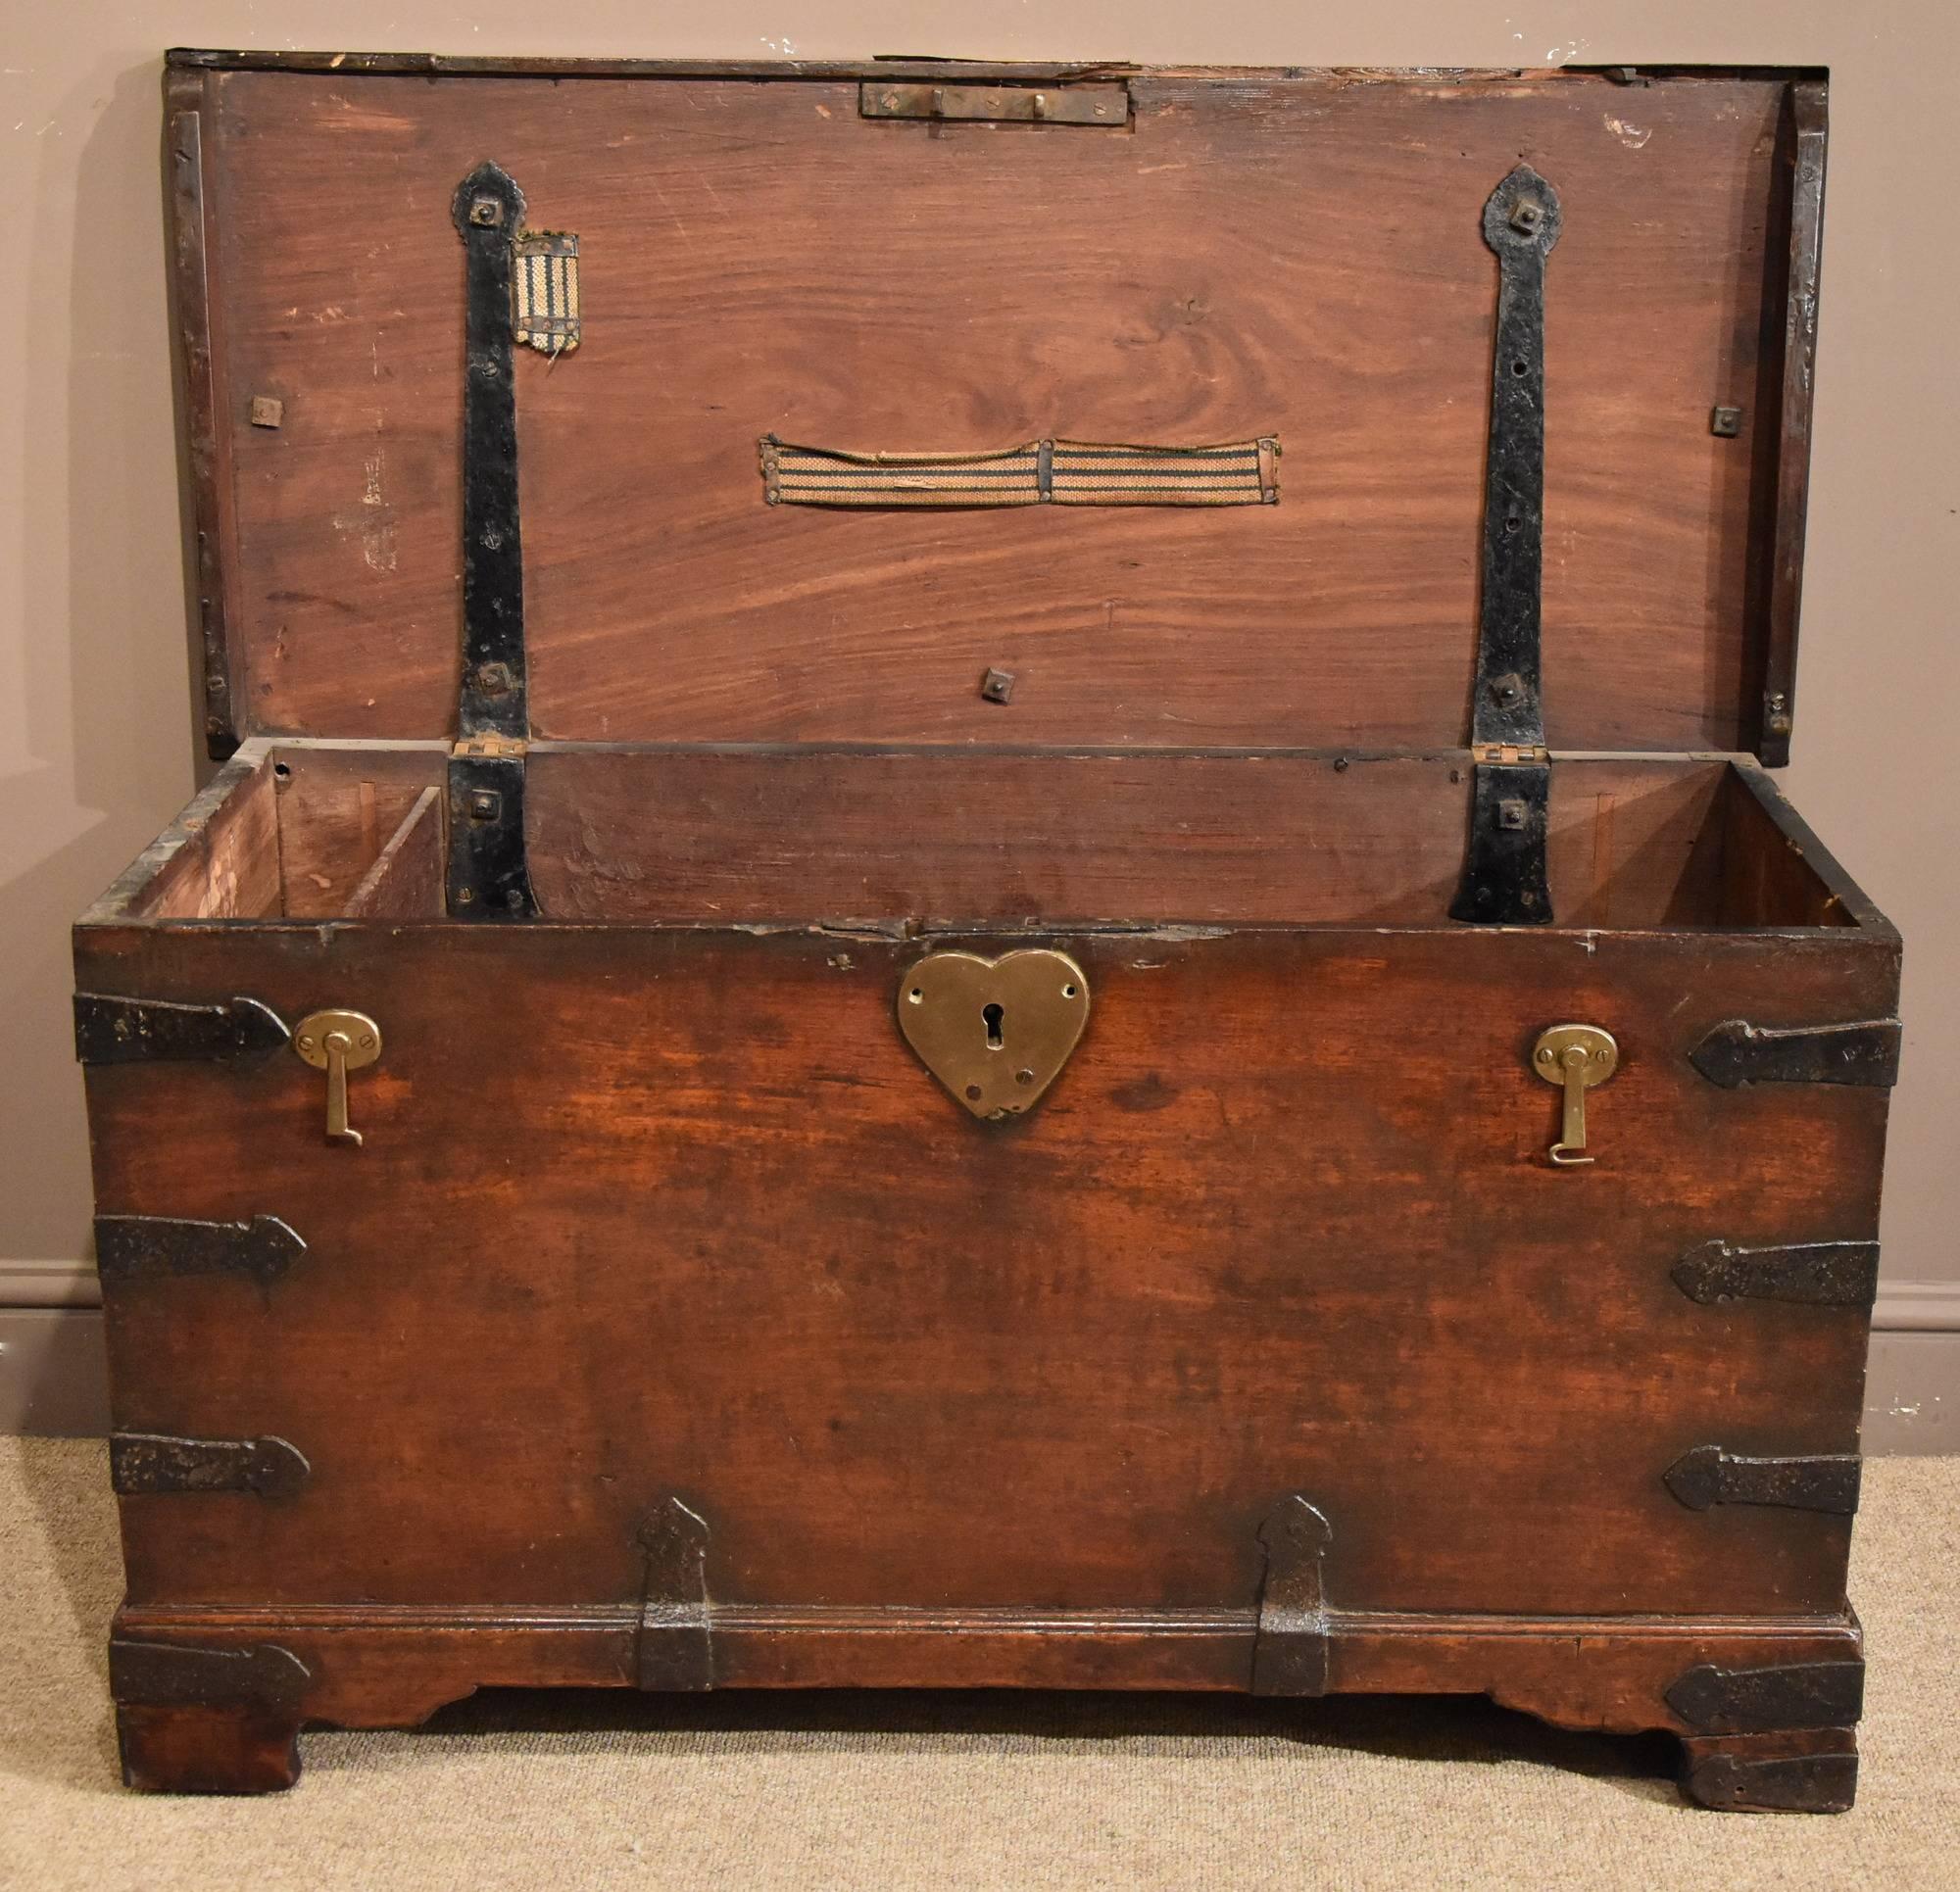 A handsome Anglo Indian teak and Iran bound trunk with brass fittings/plaques. Good color and patina, mid-19th century.

All of the items that we advertise for sale have been as accurately described as possible and are in excellent condition,